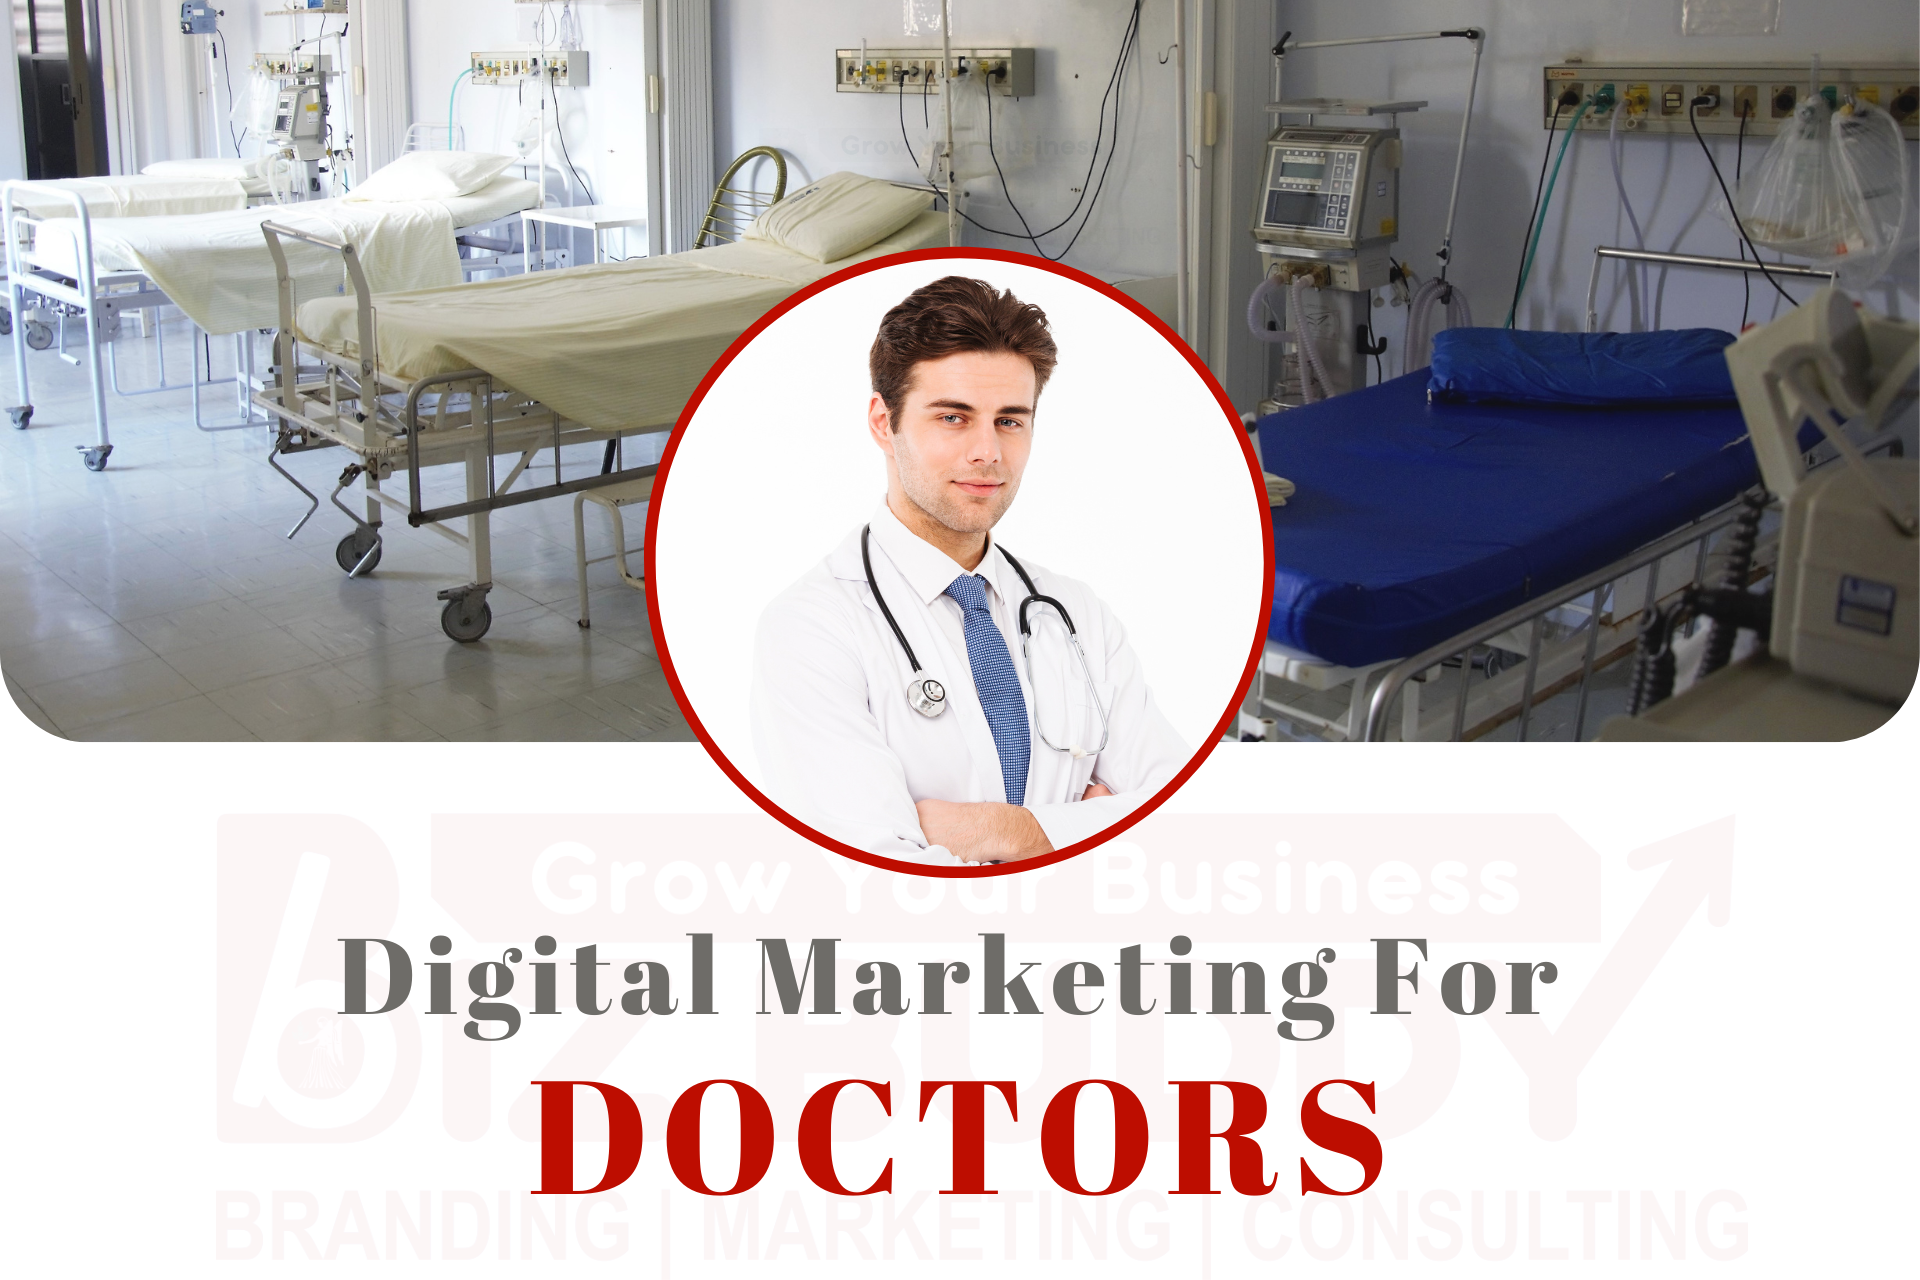 Digital Marketing Services for Doctors and Medical Professionals